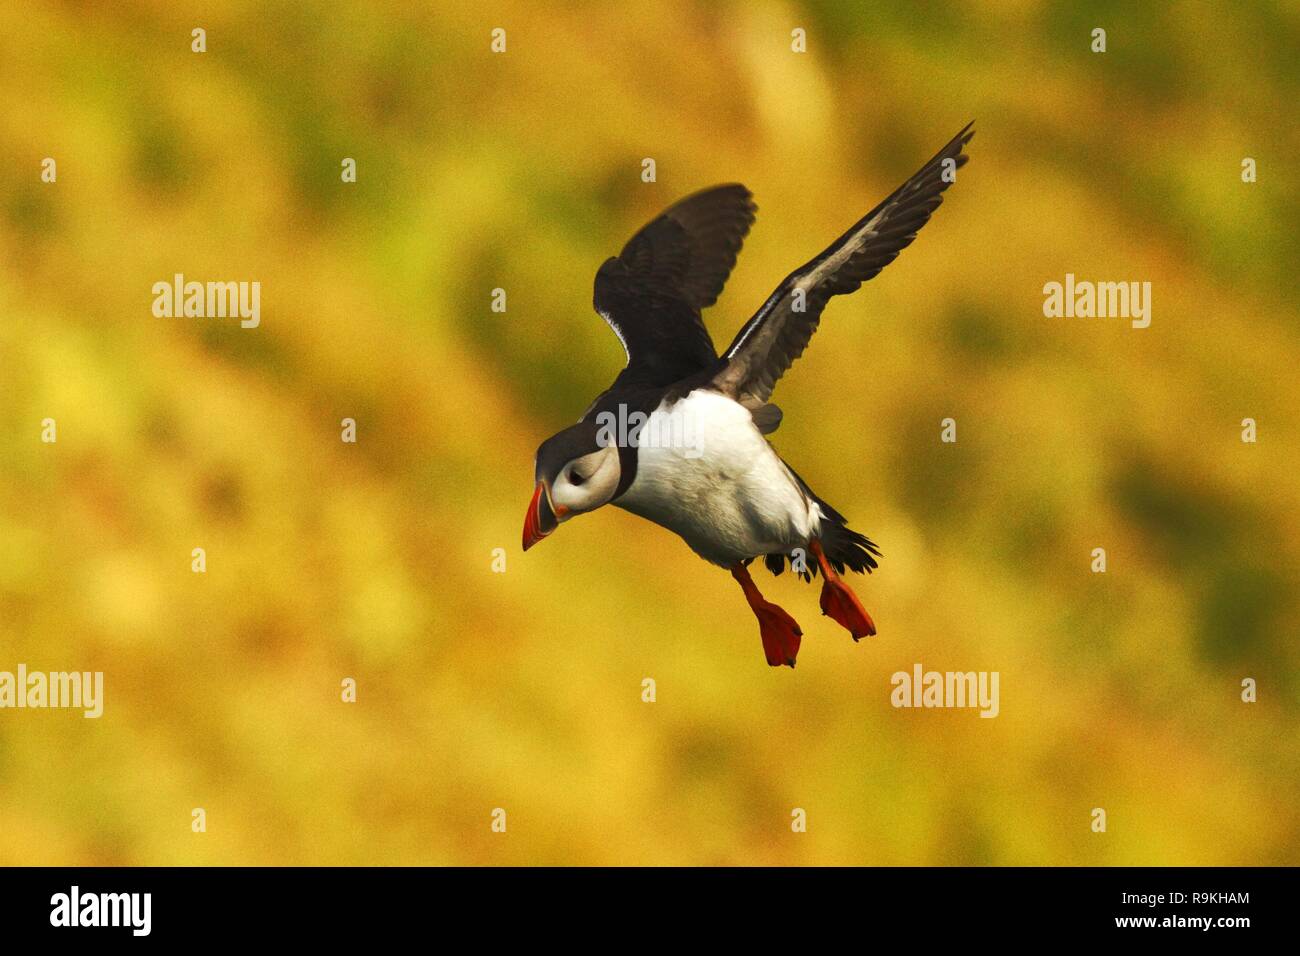 Flying puffin, Atlantic Puffin, Fratercula artica, arctic black and white cute bird with red bill on yellow background, outstretched wings, Island, co Stock Photo